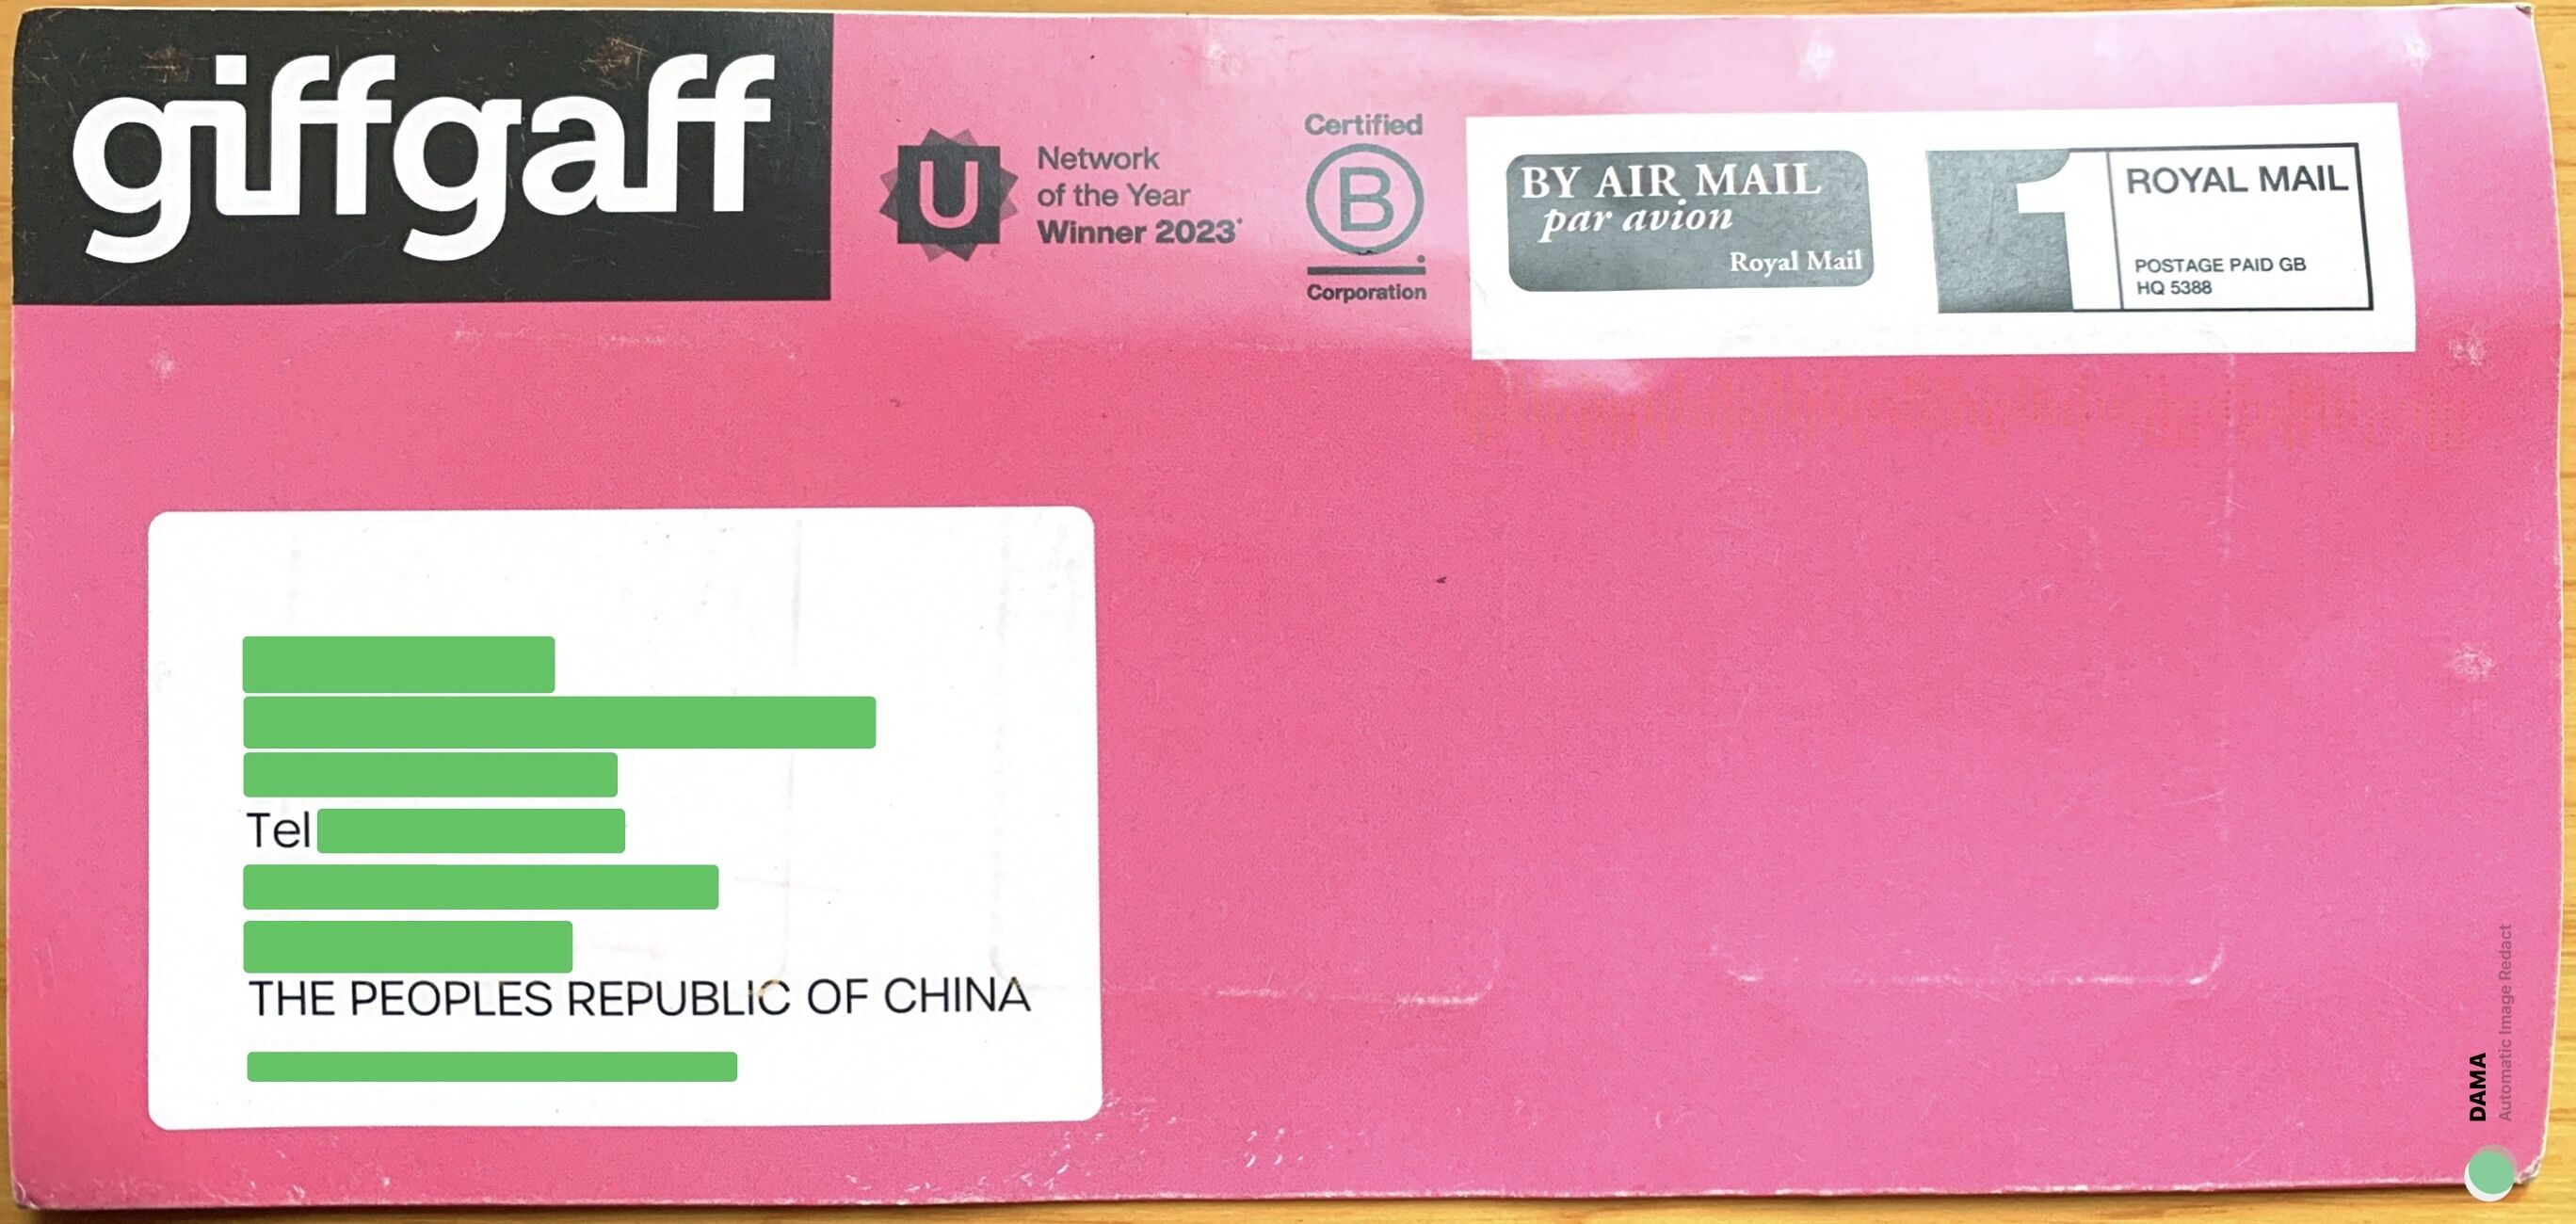 giffgaff-letter